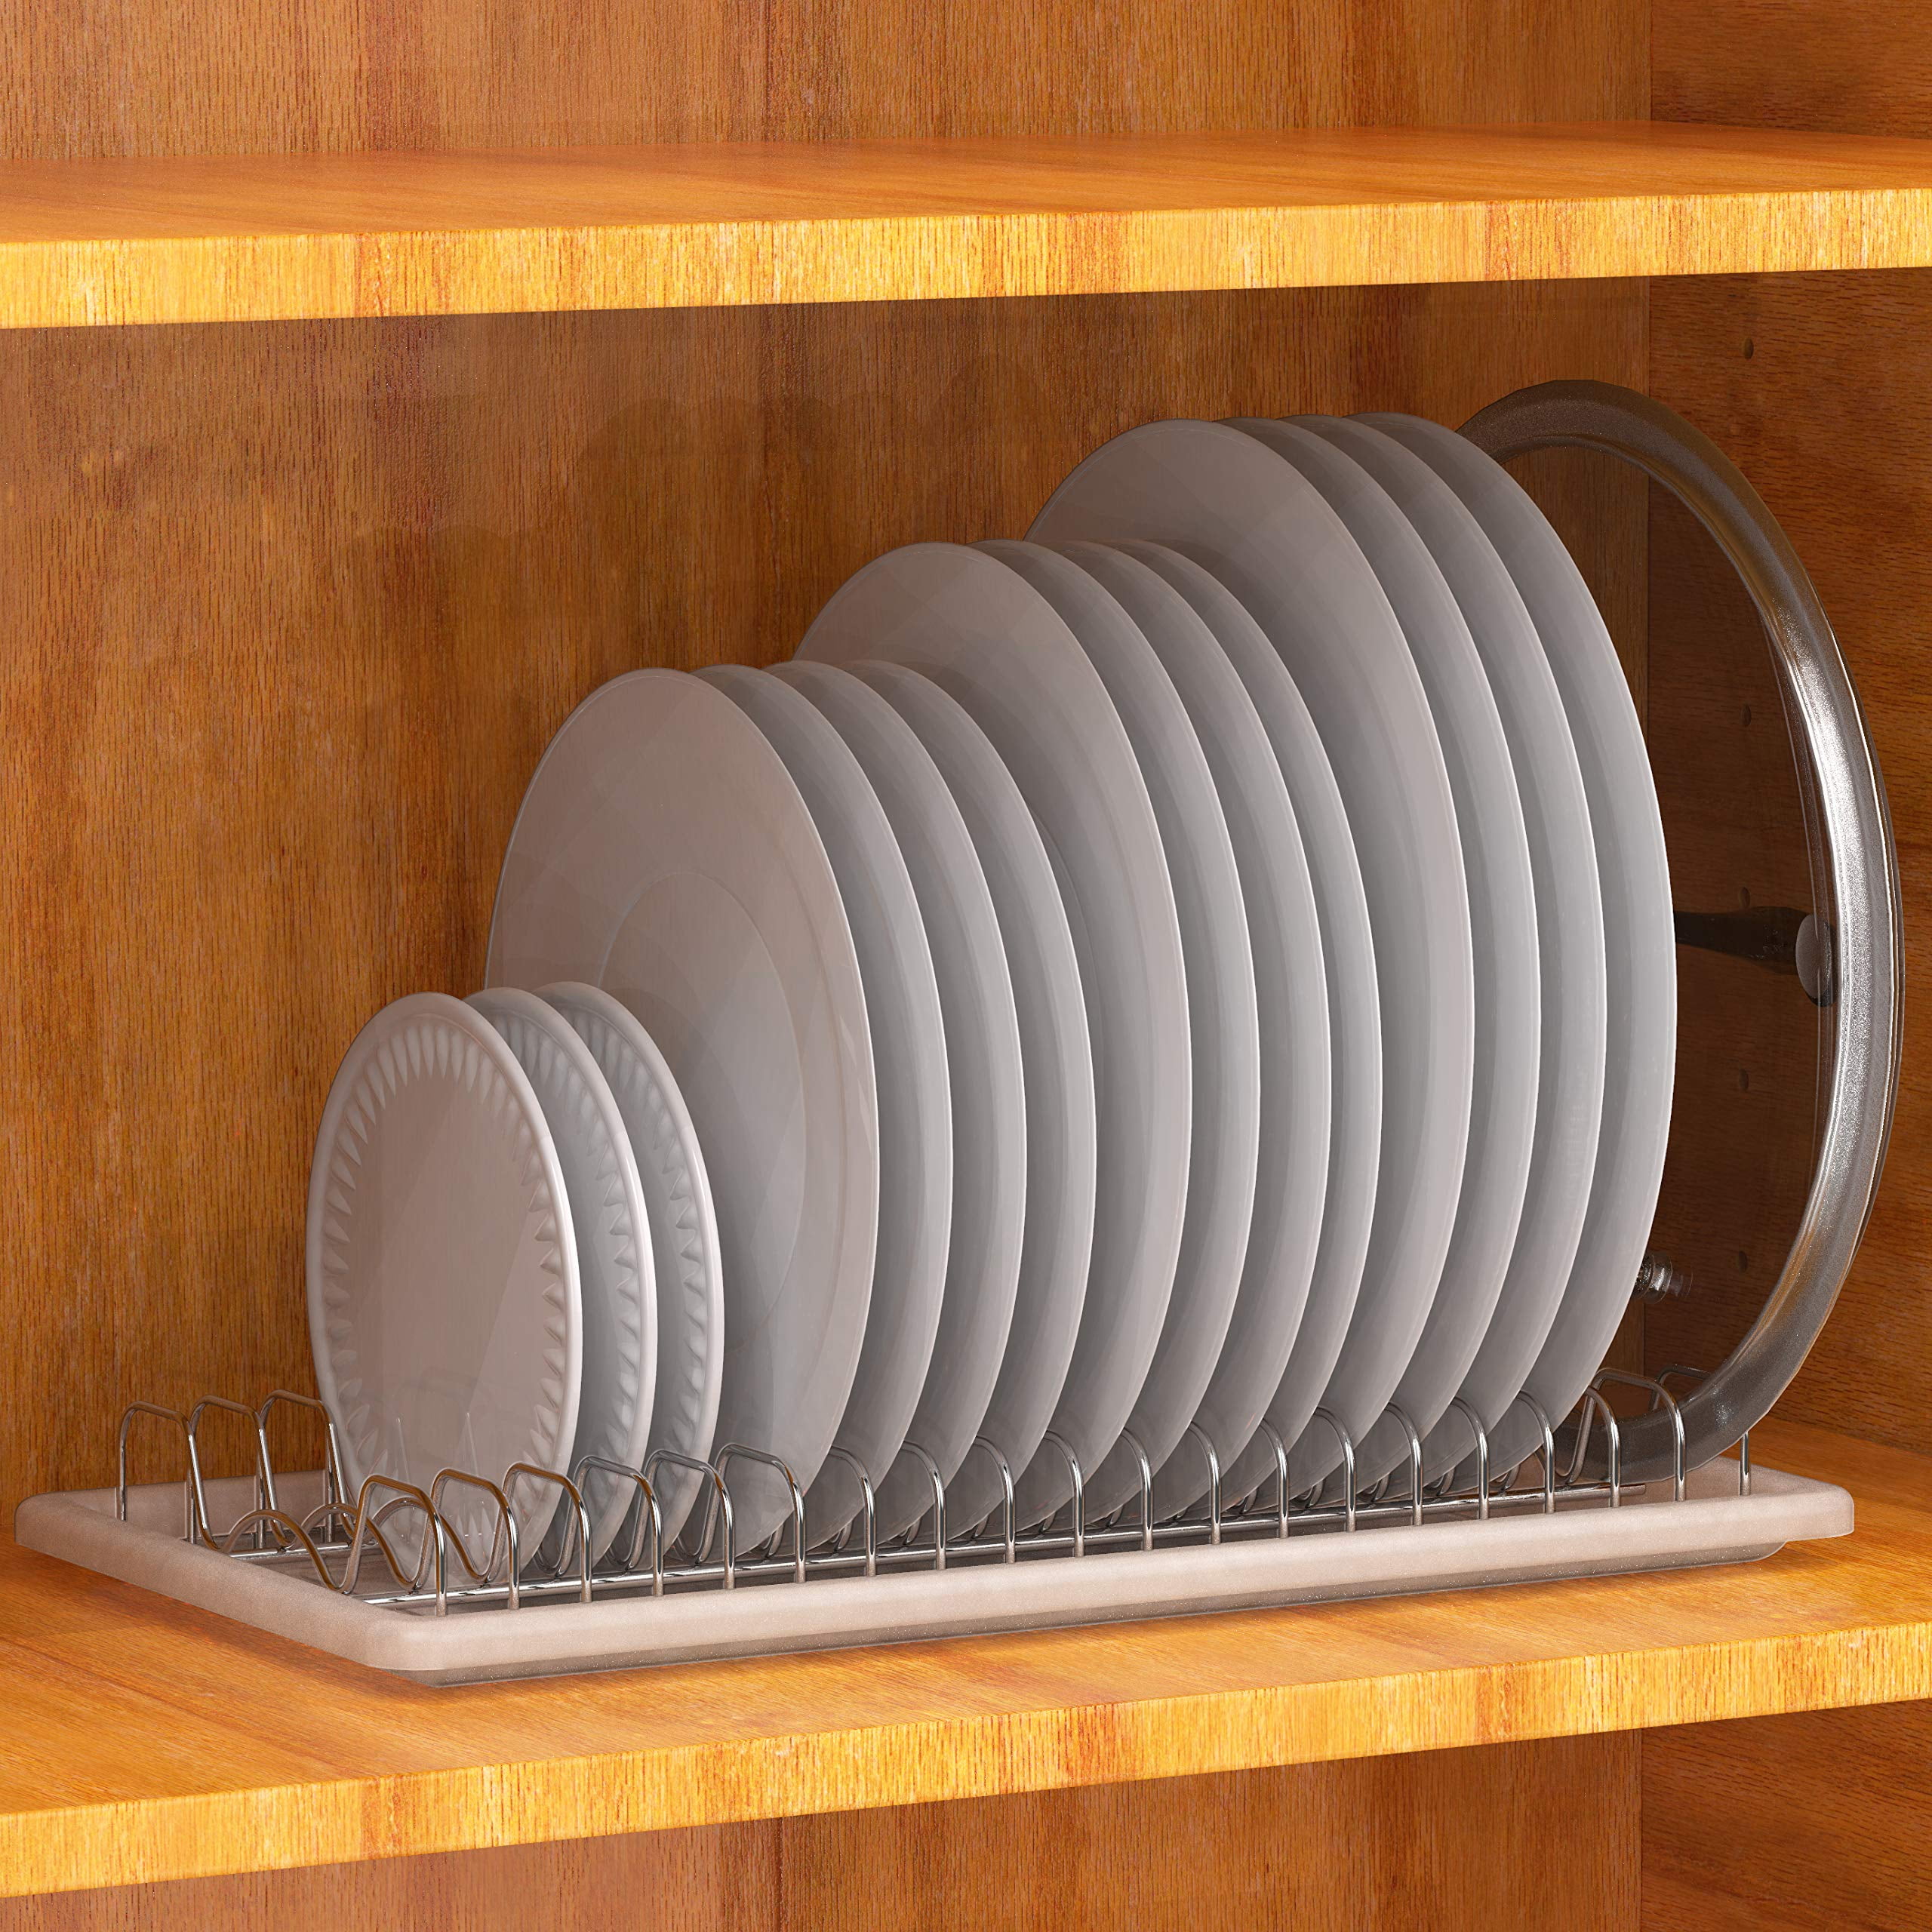 Simple Houseware Plate Drying Rack with Drainboard, Chrome